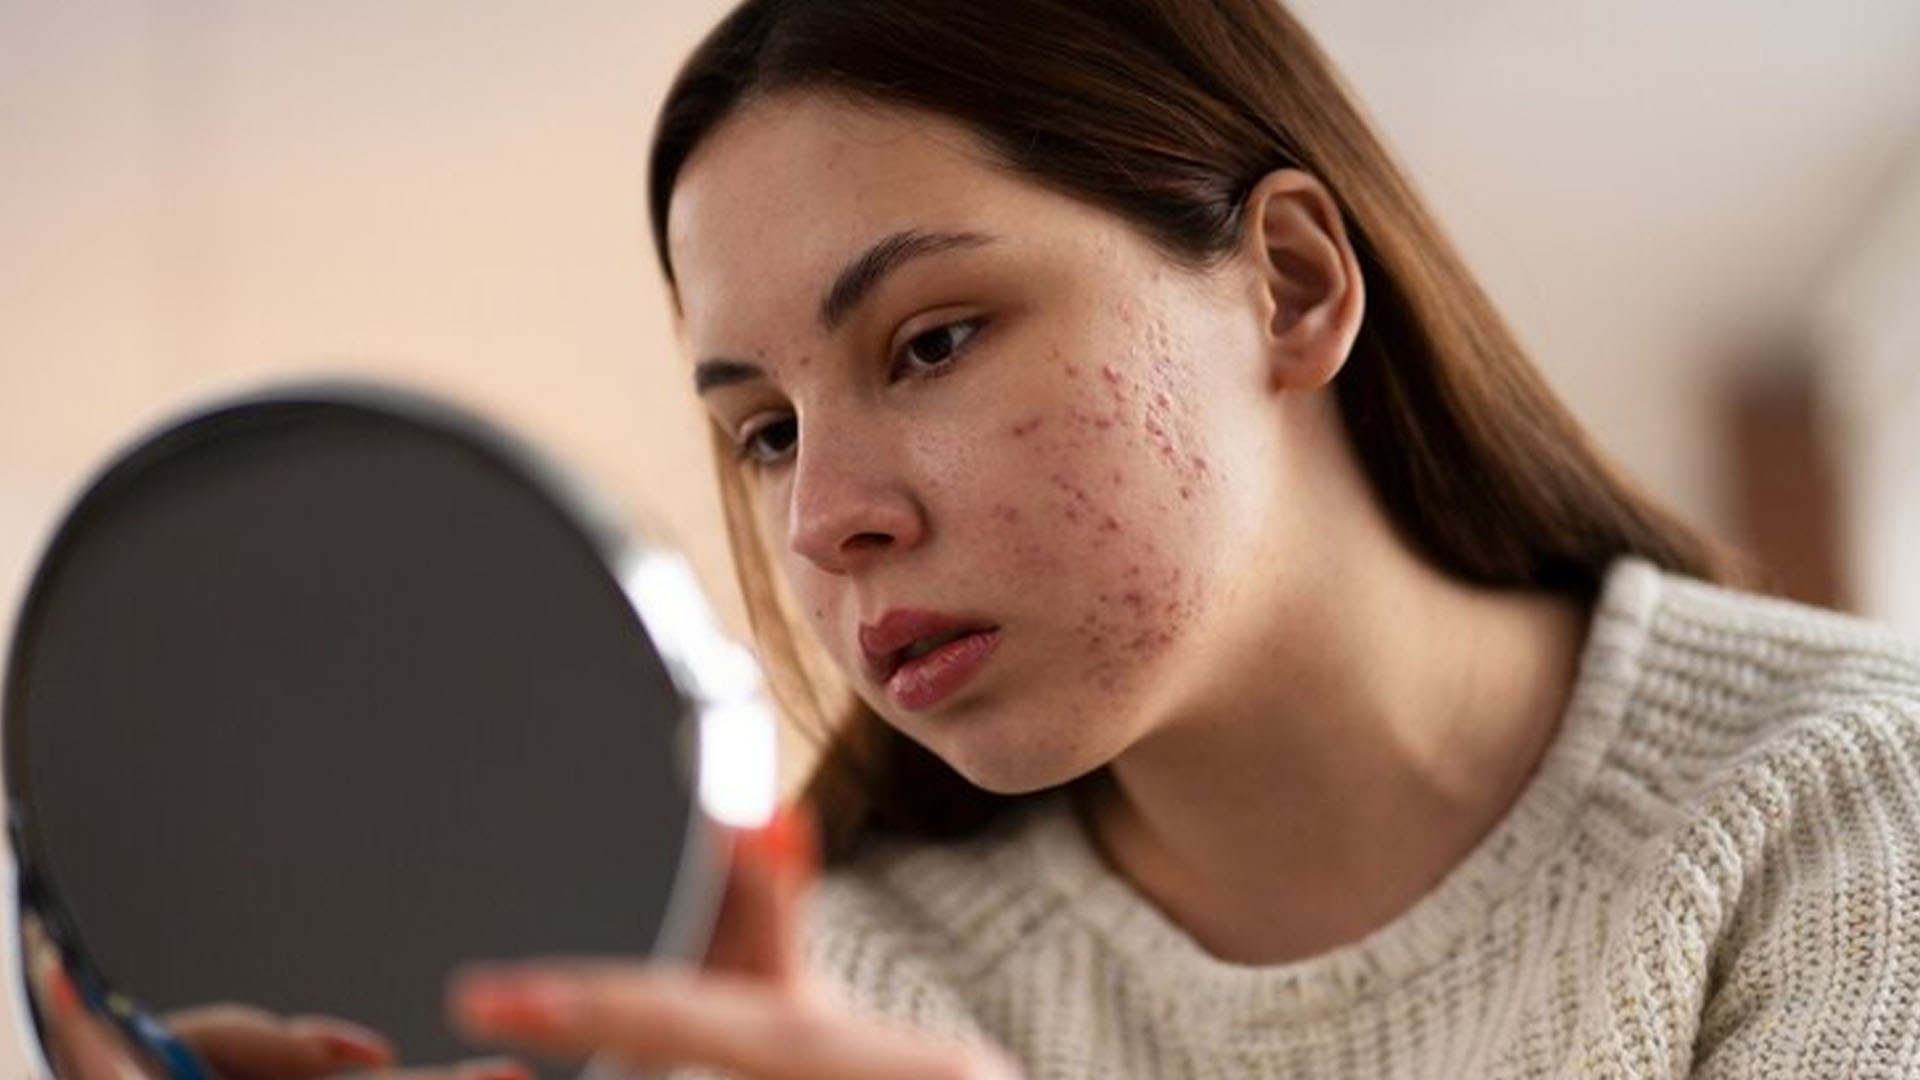 What are the Home Remedies for Acne Spots?